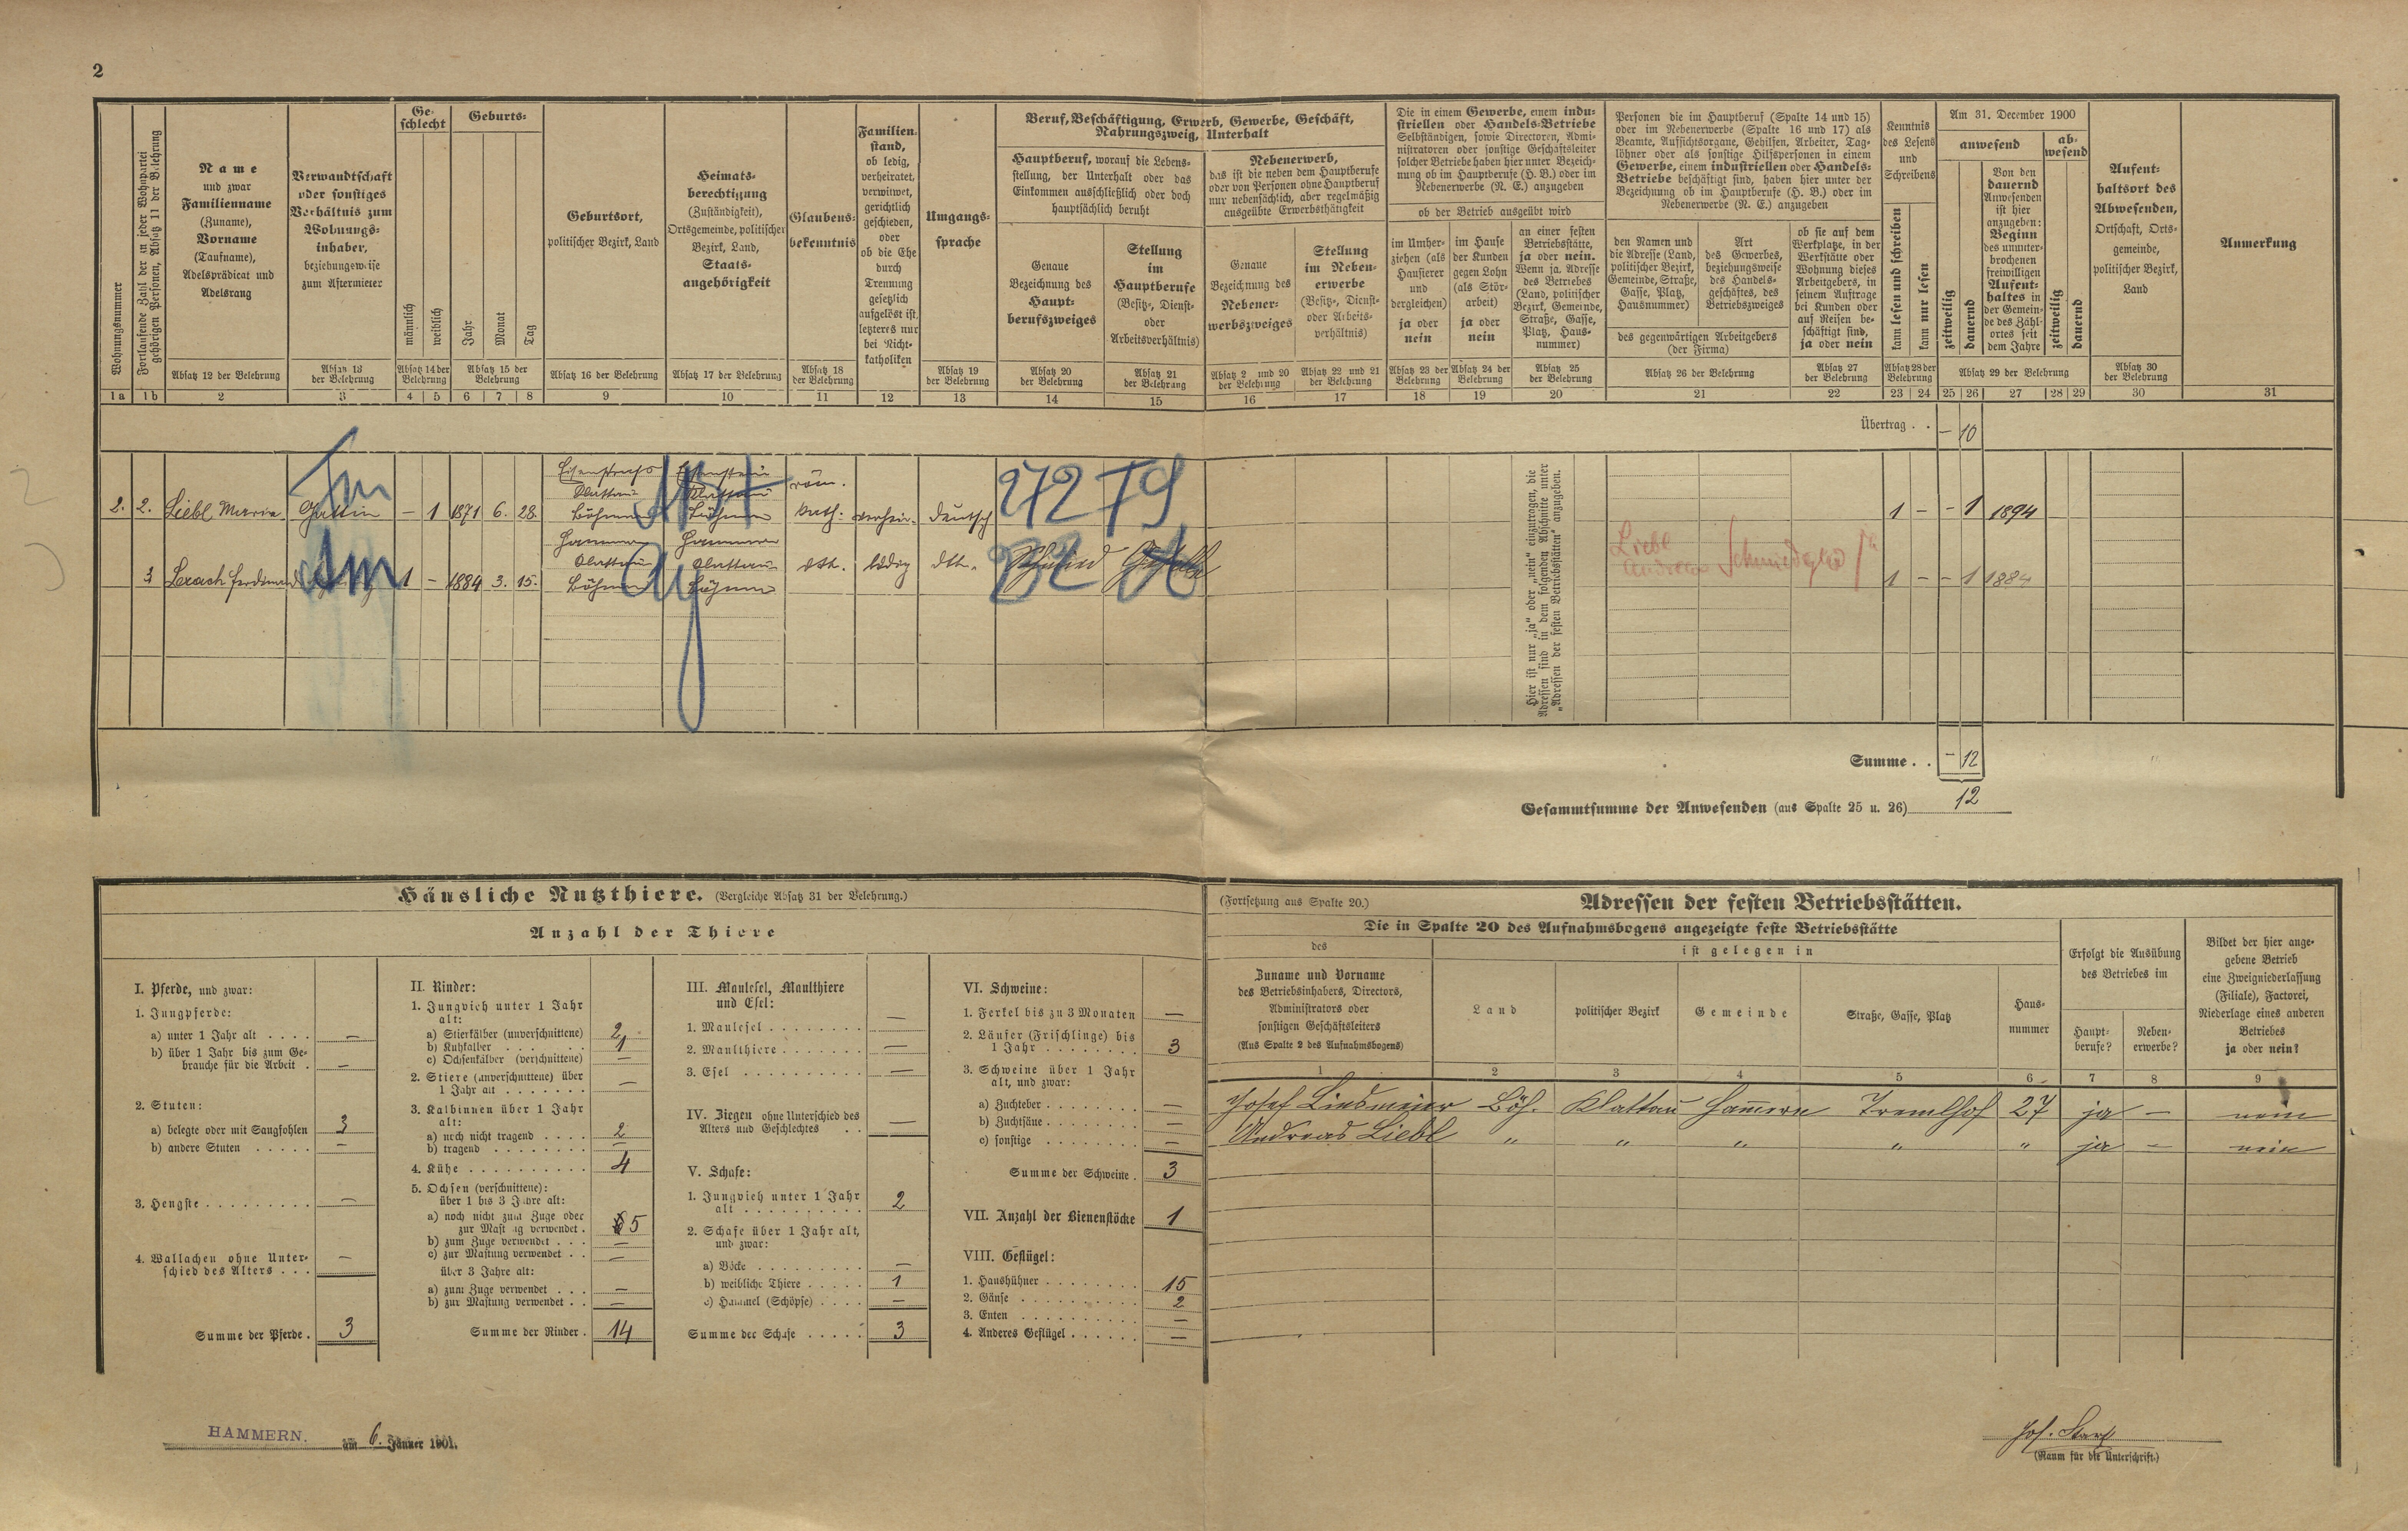 4. soap-kt_01159_census-1900-hamry-cp027_0040